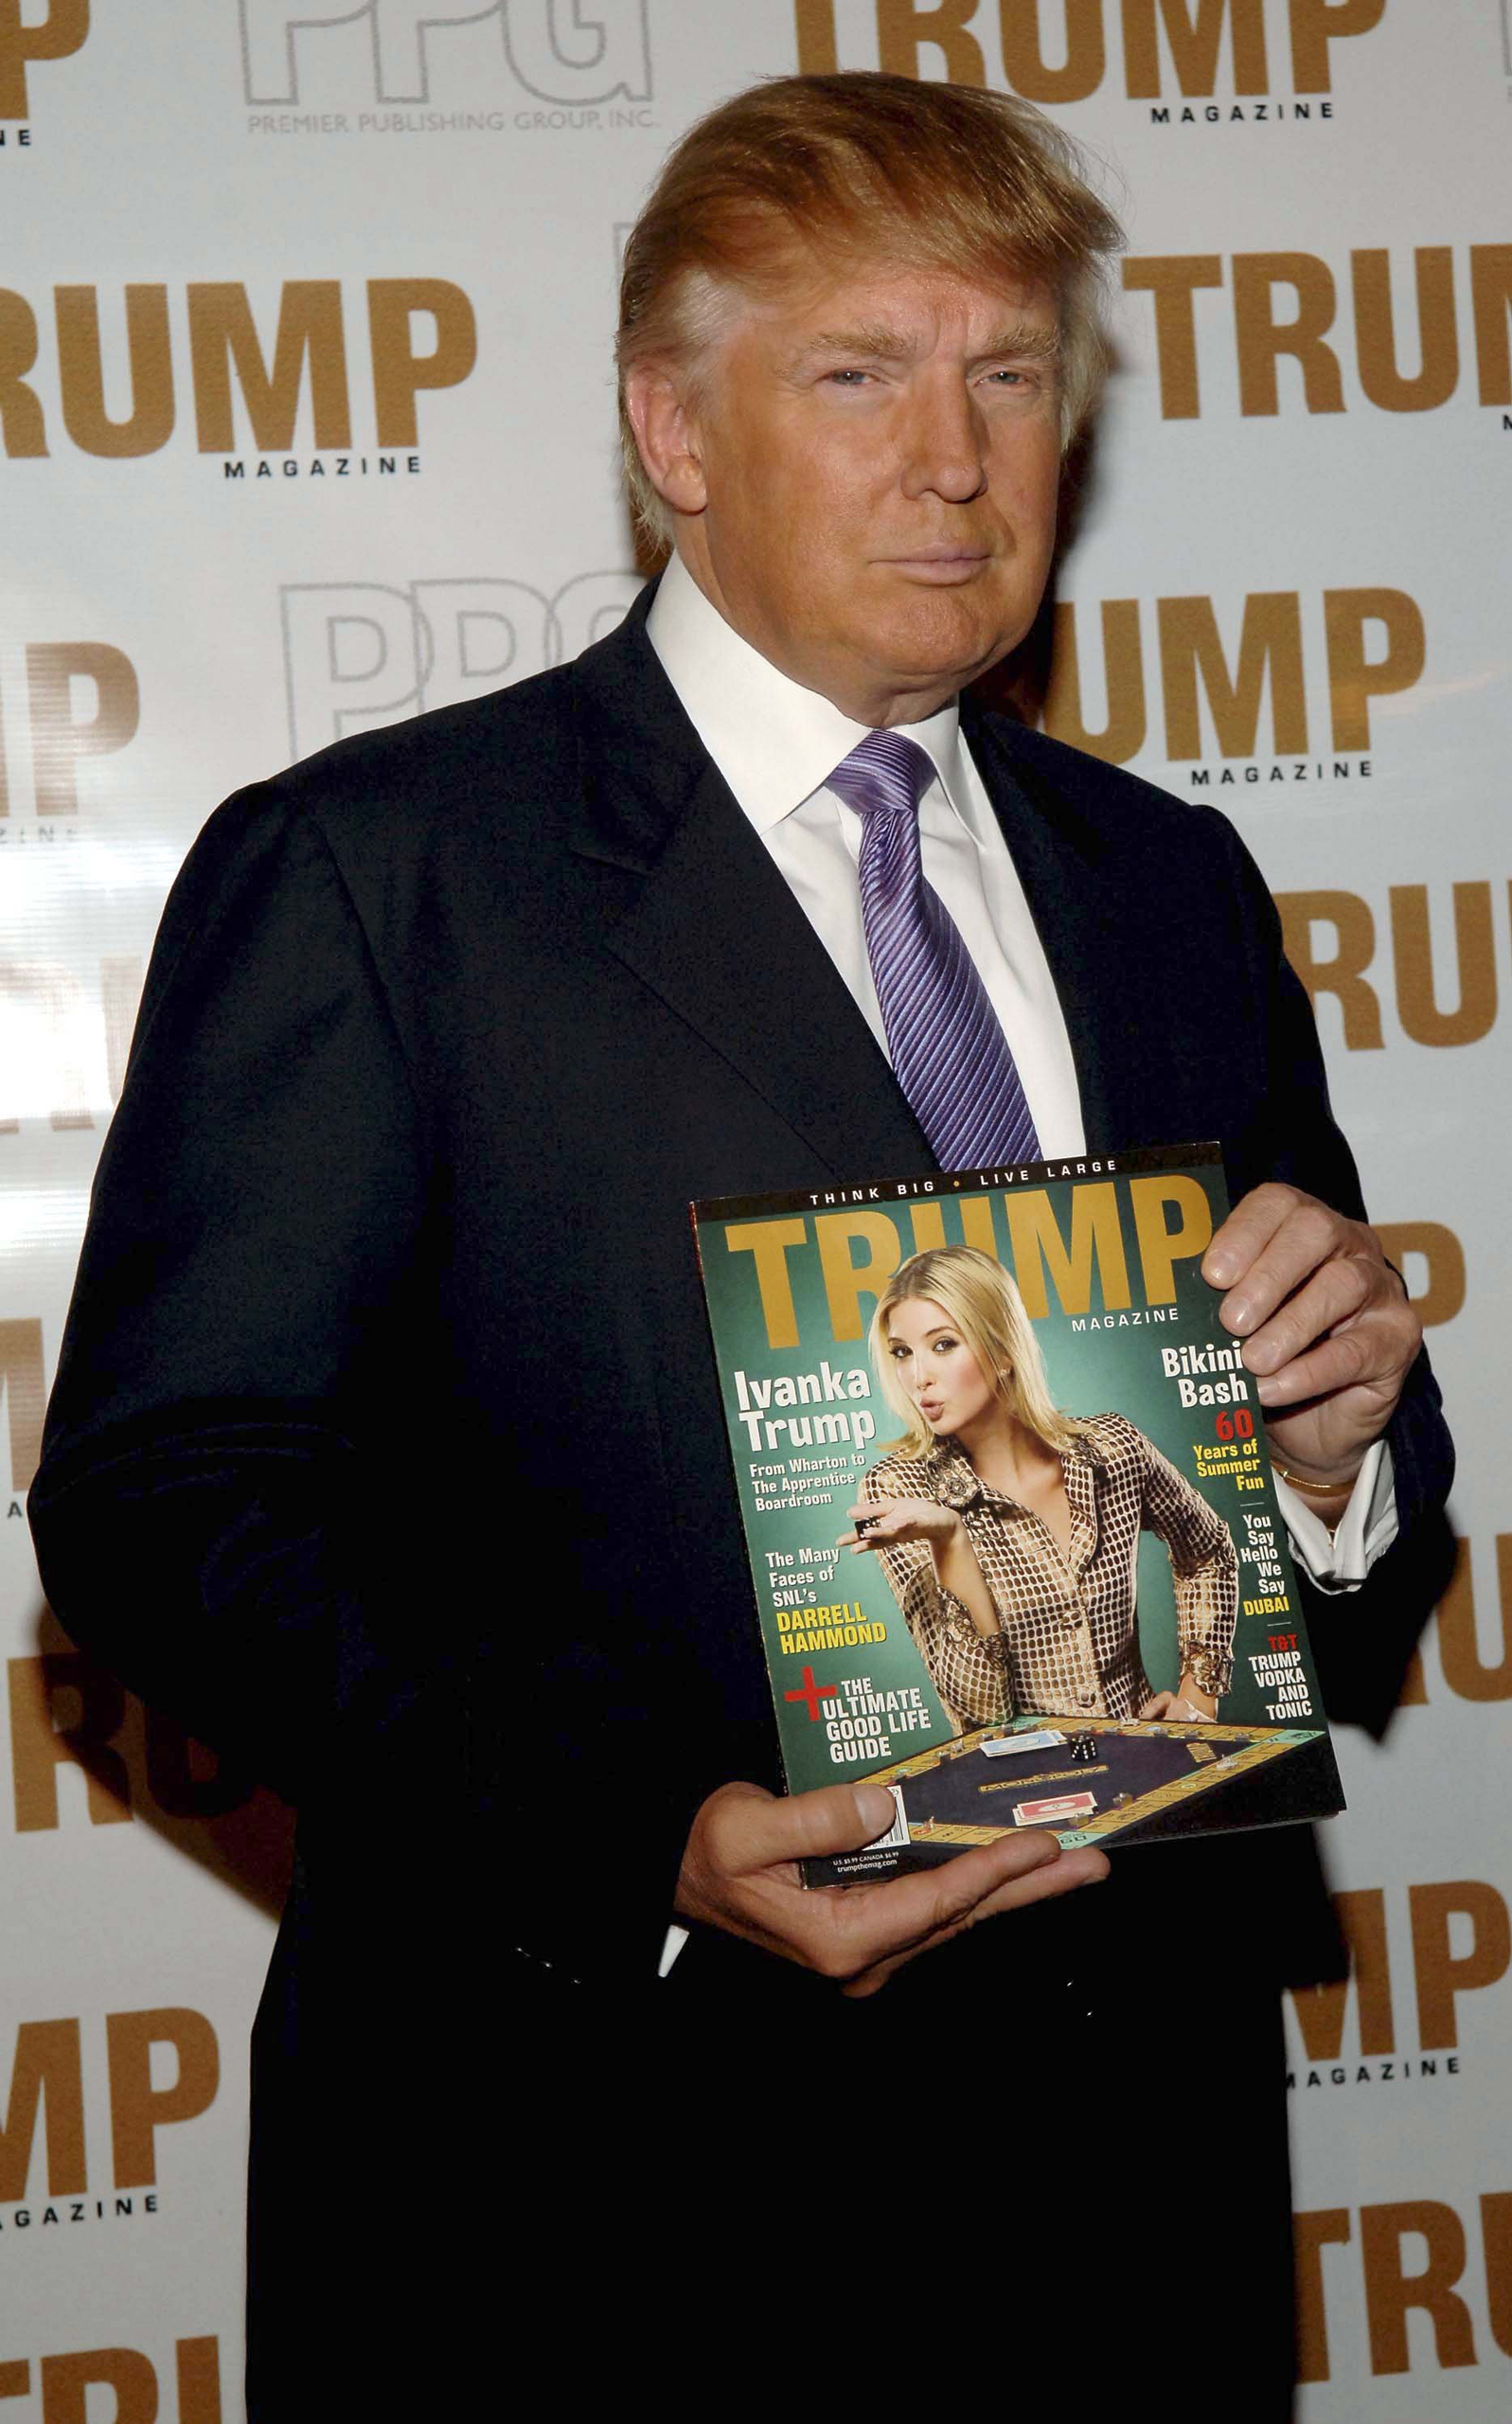 NEW YORK - SEPTEMBER 20: Donald Trump poses at the Trump Magazine celebration on September 20, 2006 in New York City. (Photo by Gustavo Caballero/Getty Images)